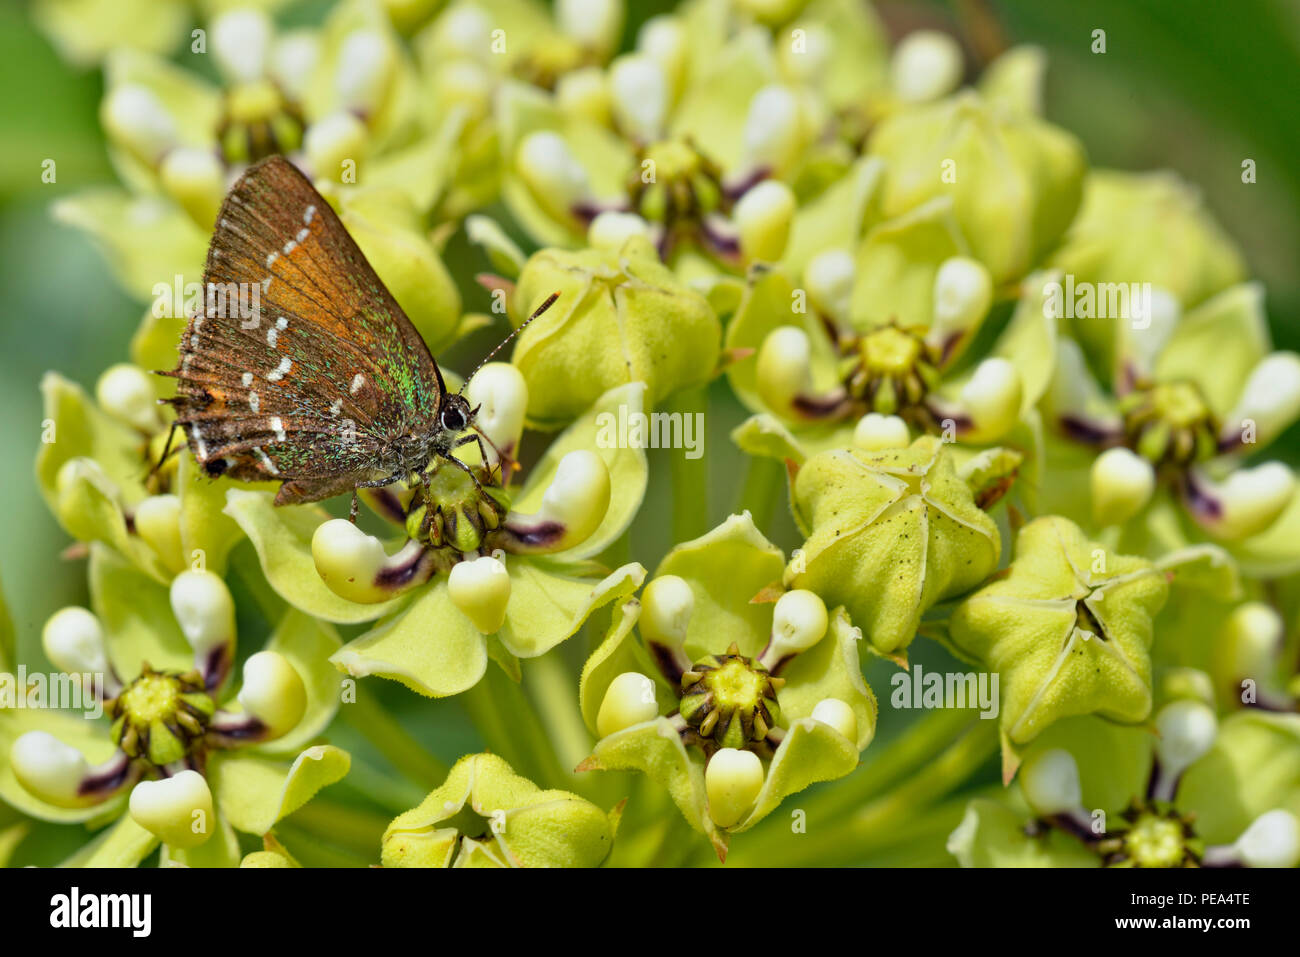 Antelope-Horns (Asclepias asperula) and foraging butterfly, Turkey Bend LCRA, Marble Falls, Texas, USA Stock Photo